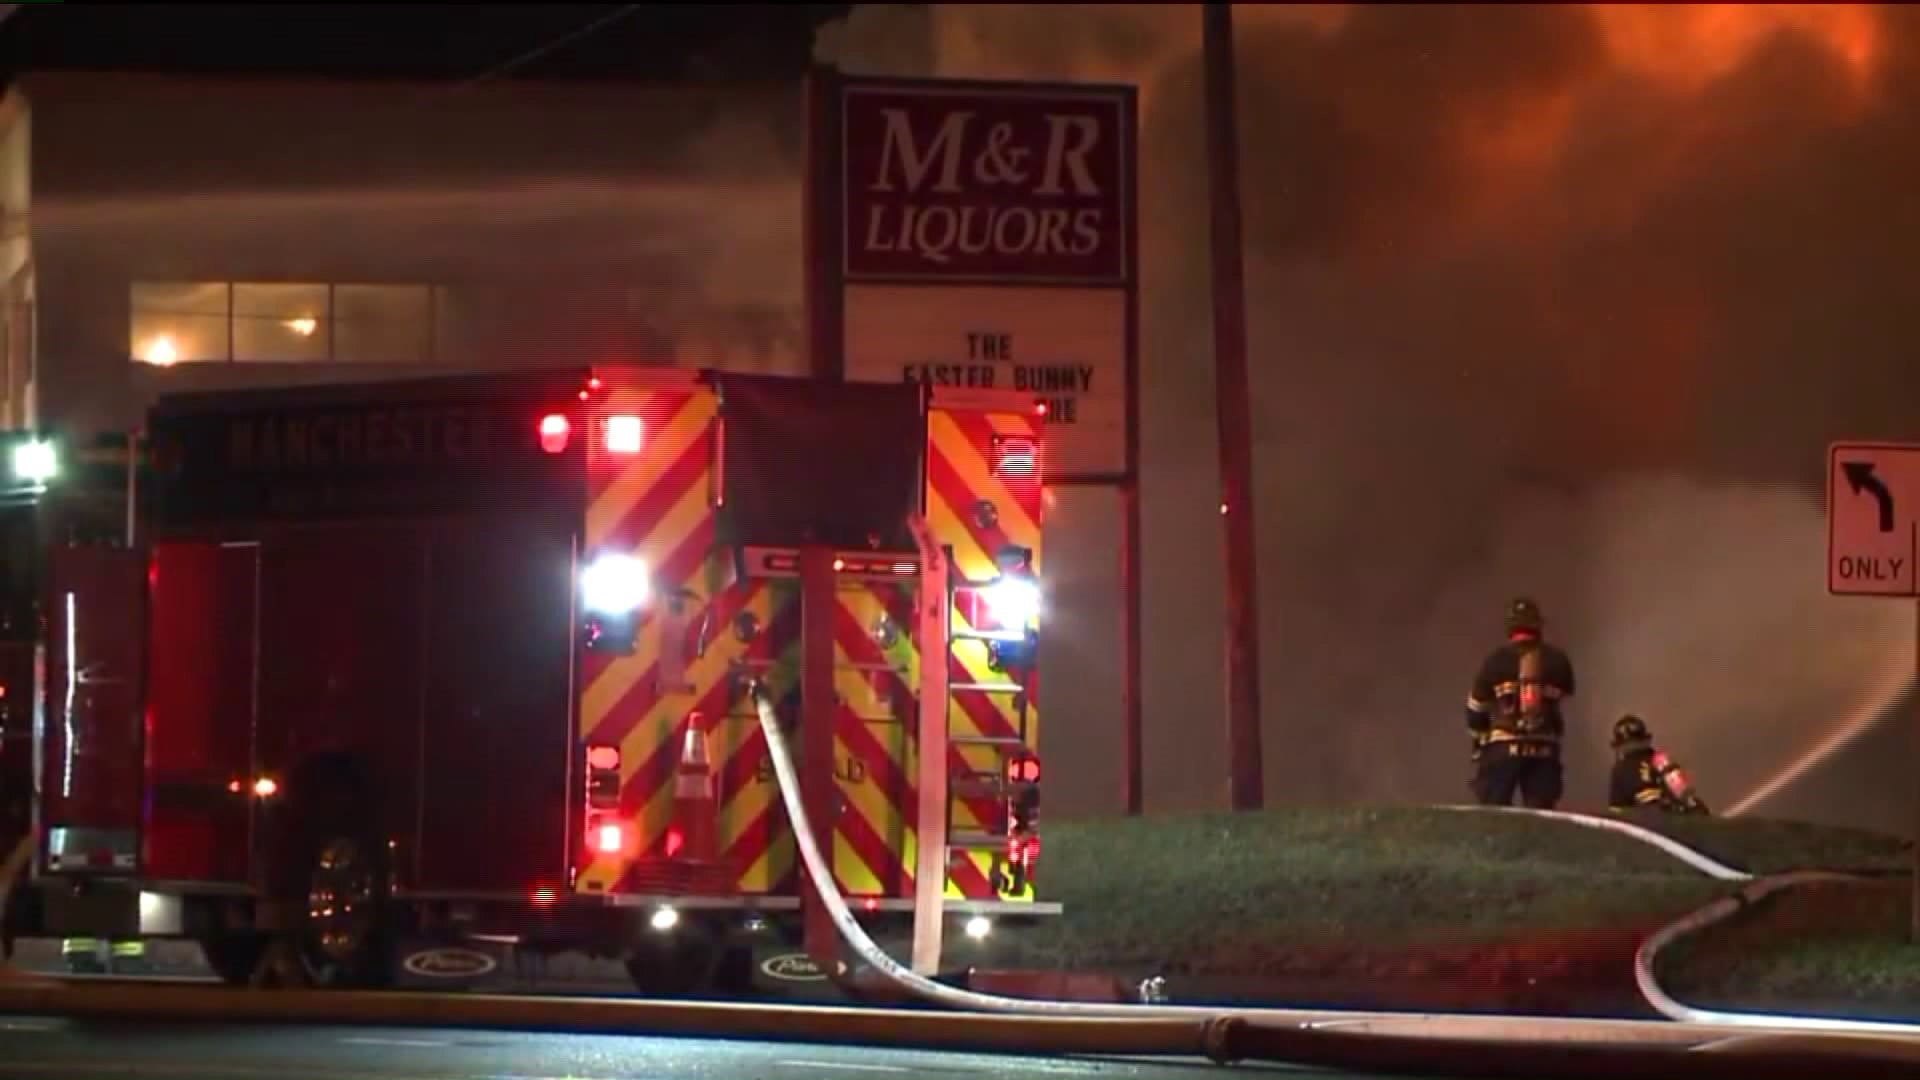 M&R liquors recovers from devastating fire